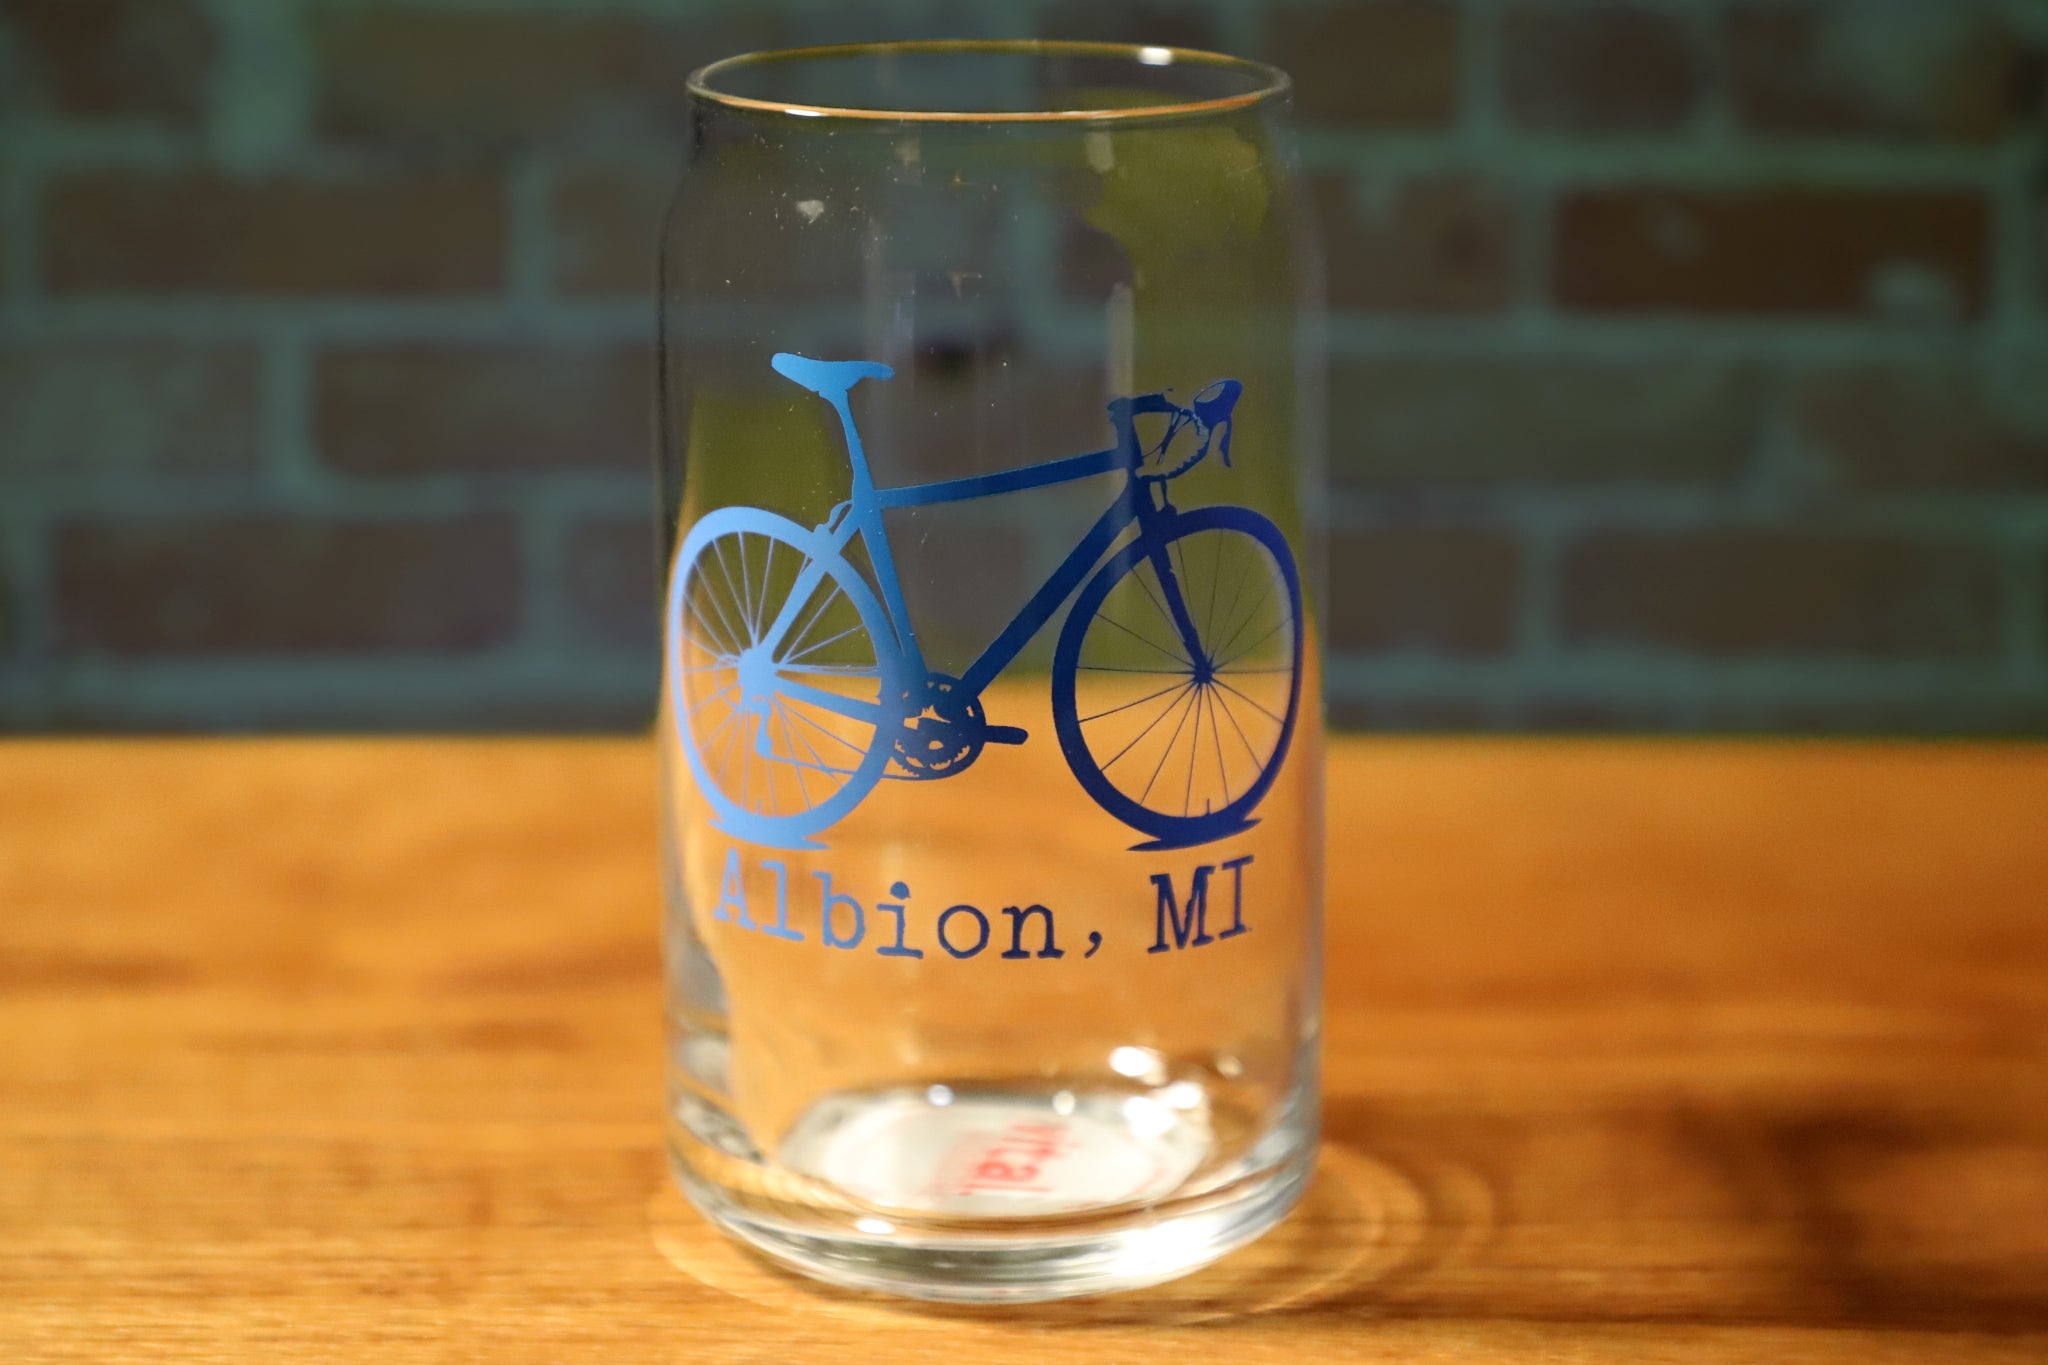 Albion, MI Bicycle Can Glass